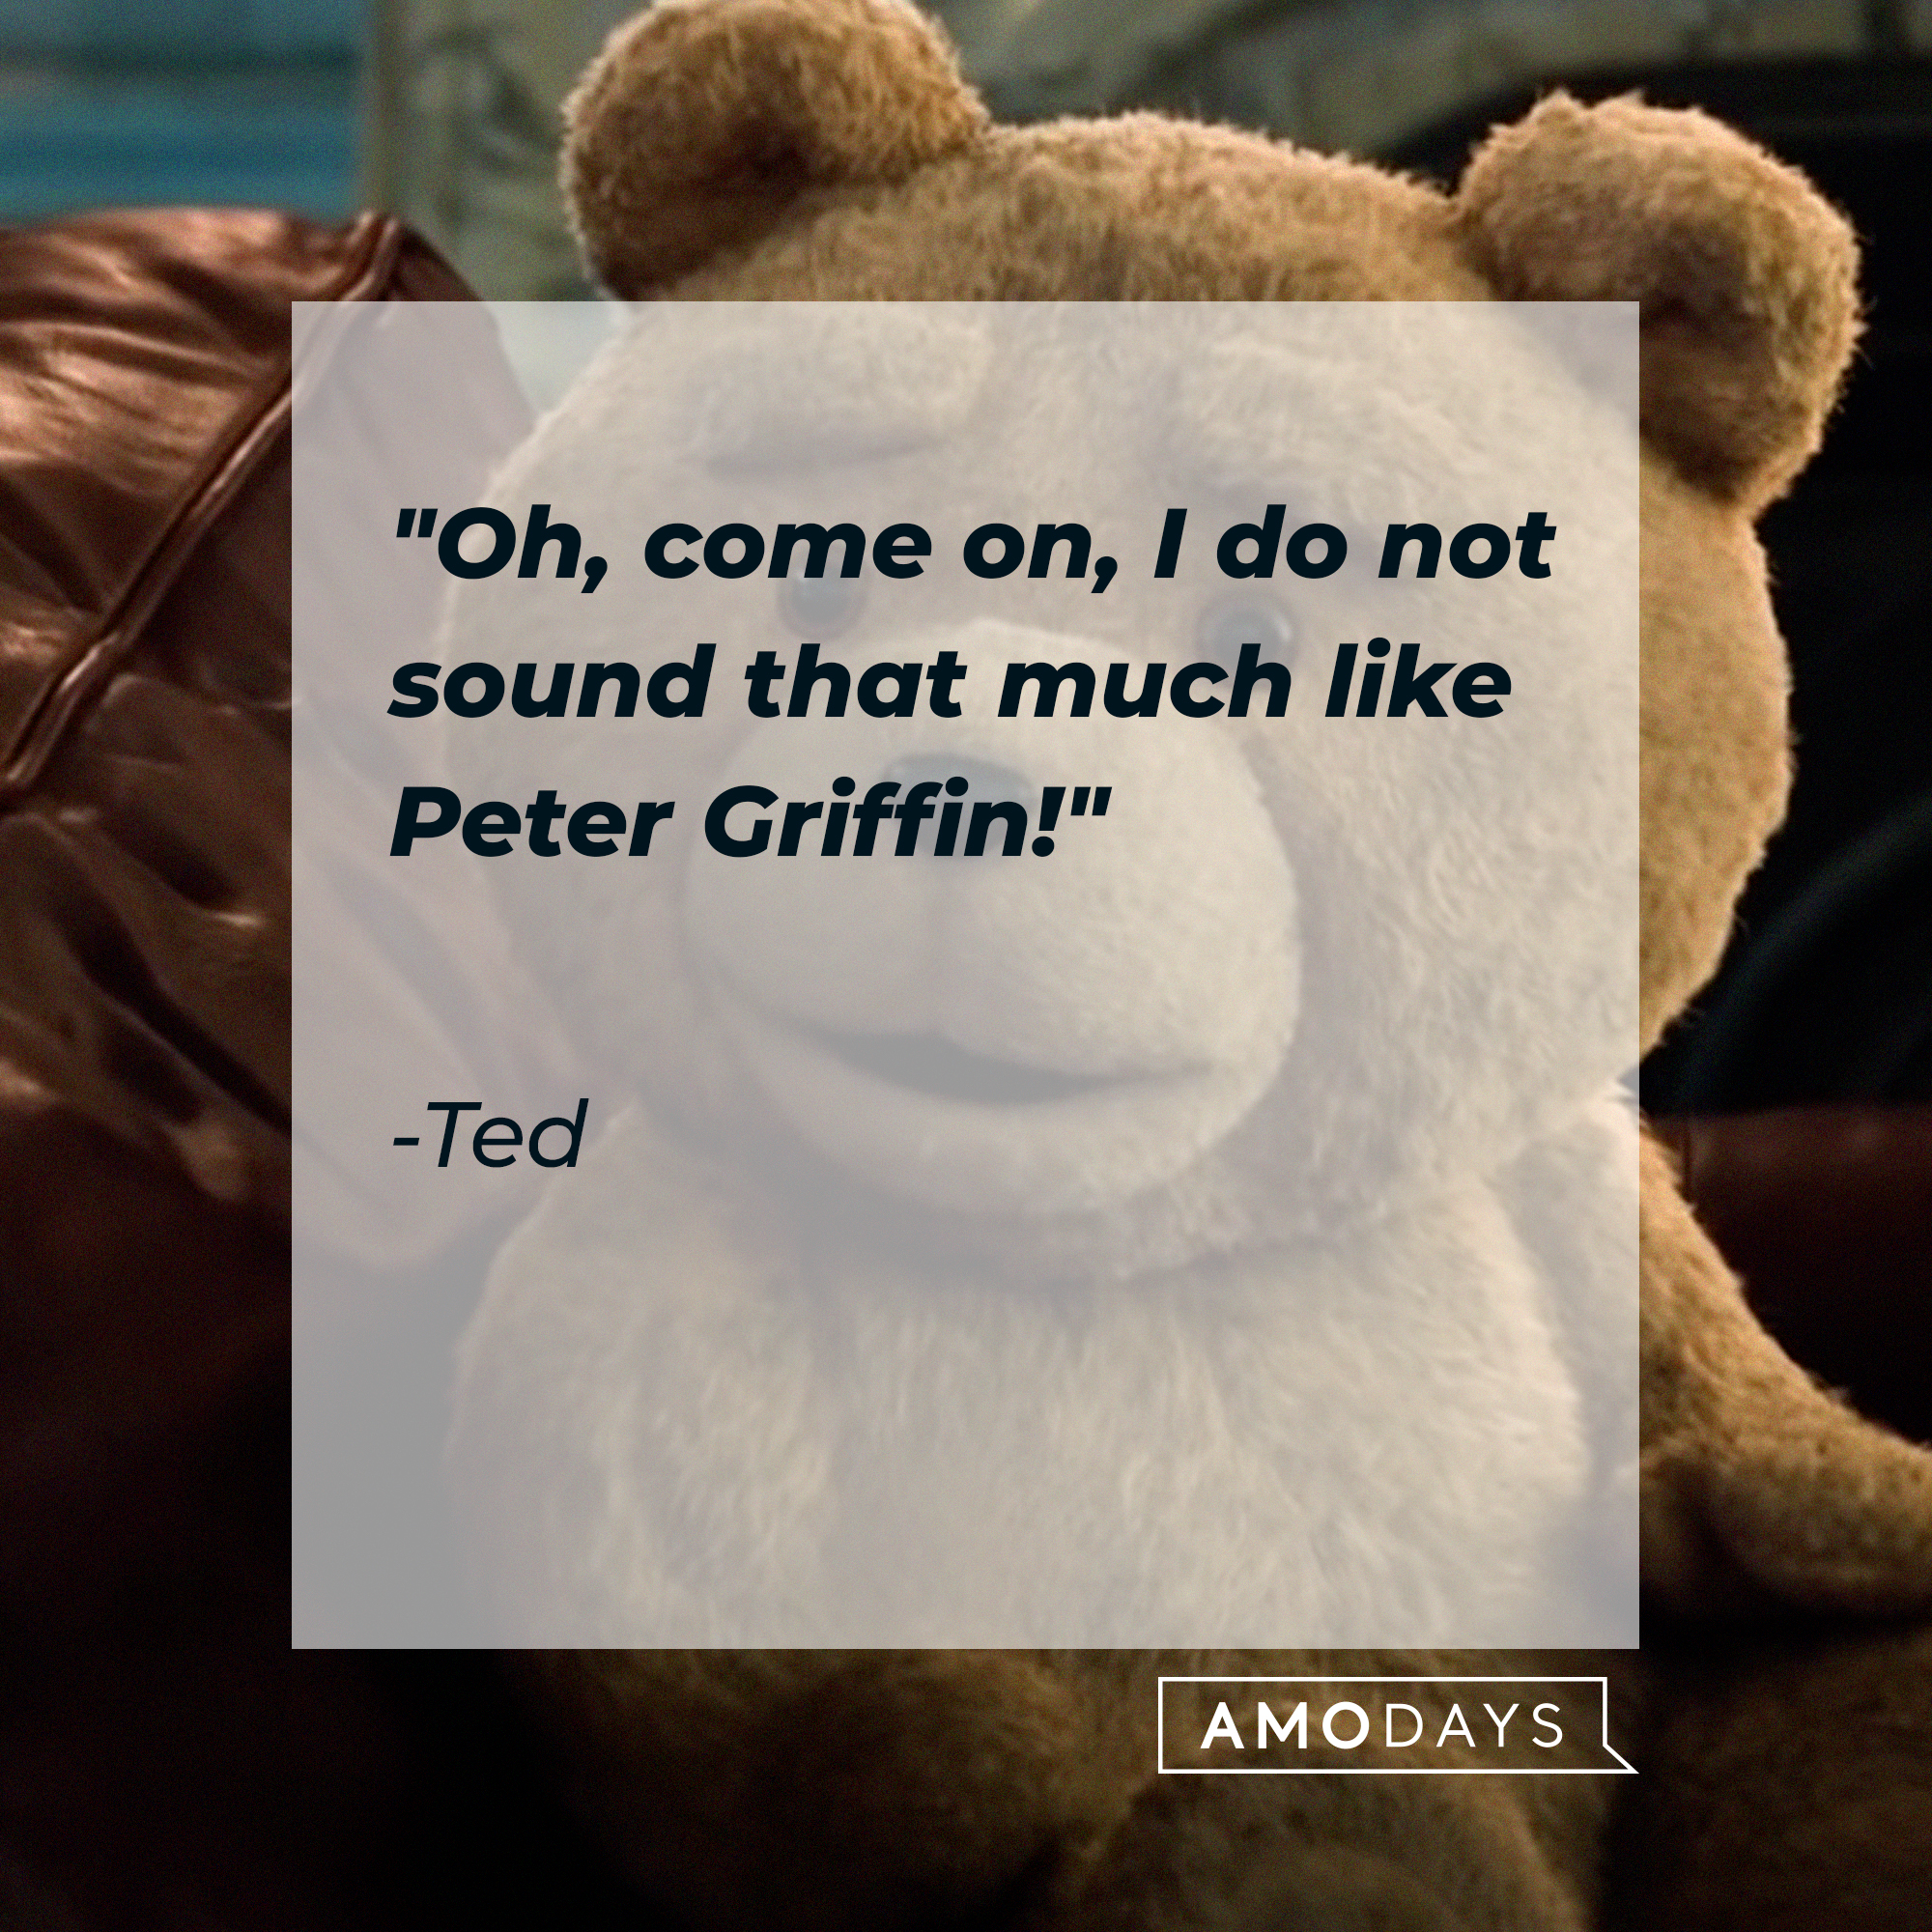 Ted's quote: "Oh, come on, I do not sound that much like Peter Griffin!" | Source: facebook.com/tedisreal